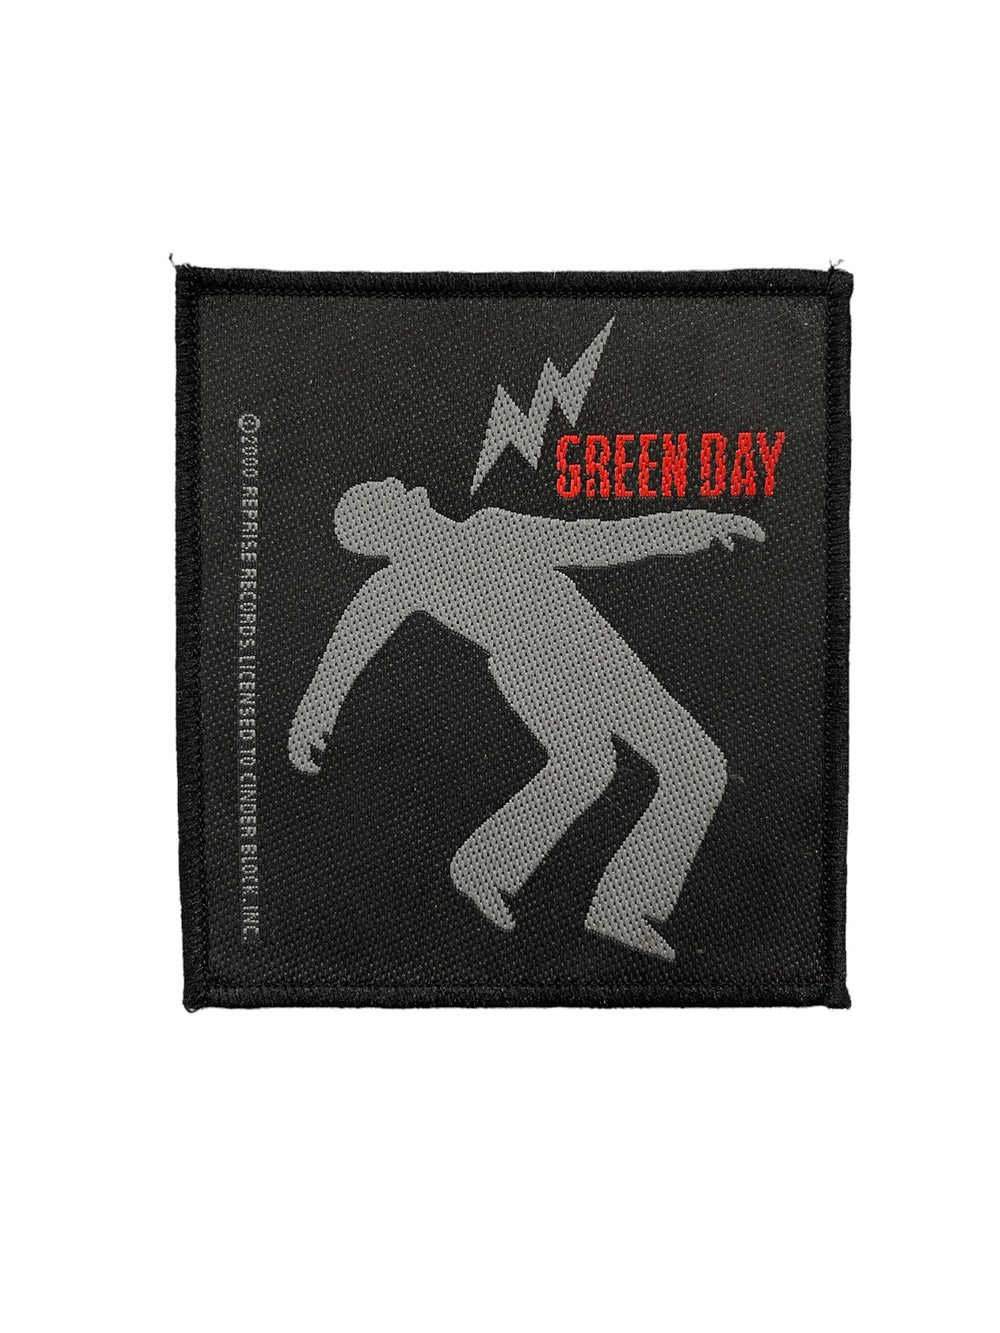 Green Day Lightning Official Woven Patch Brand New